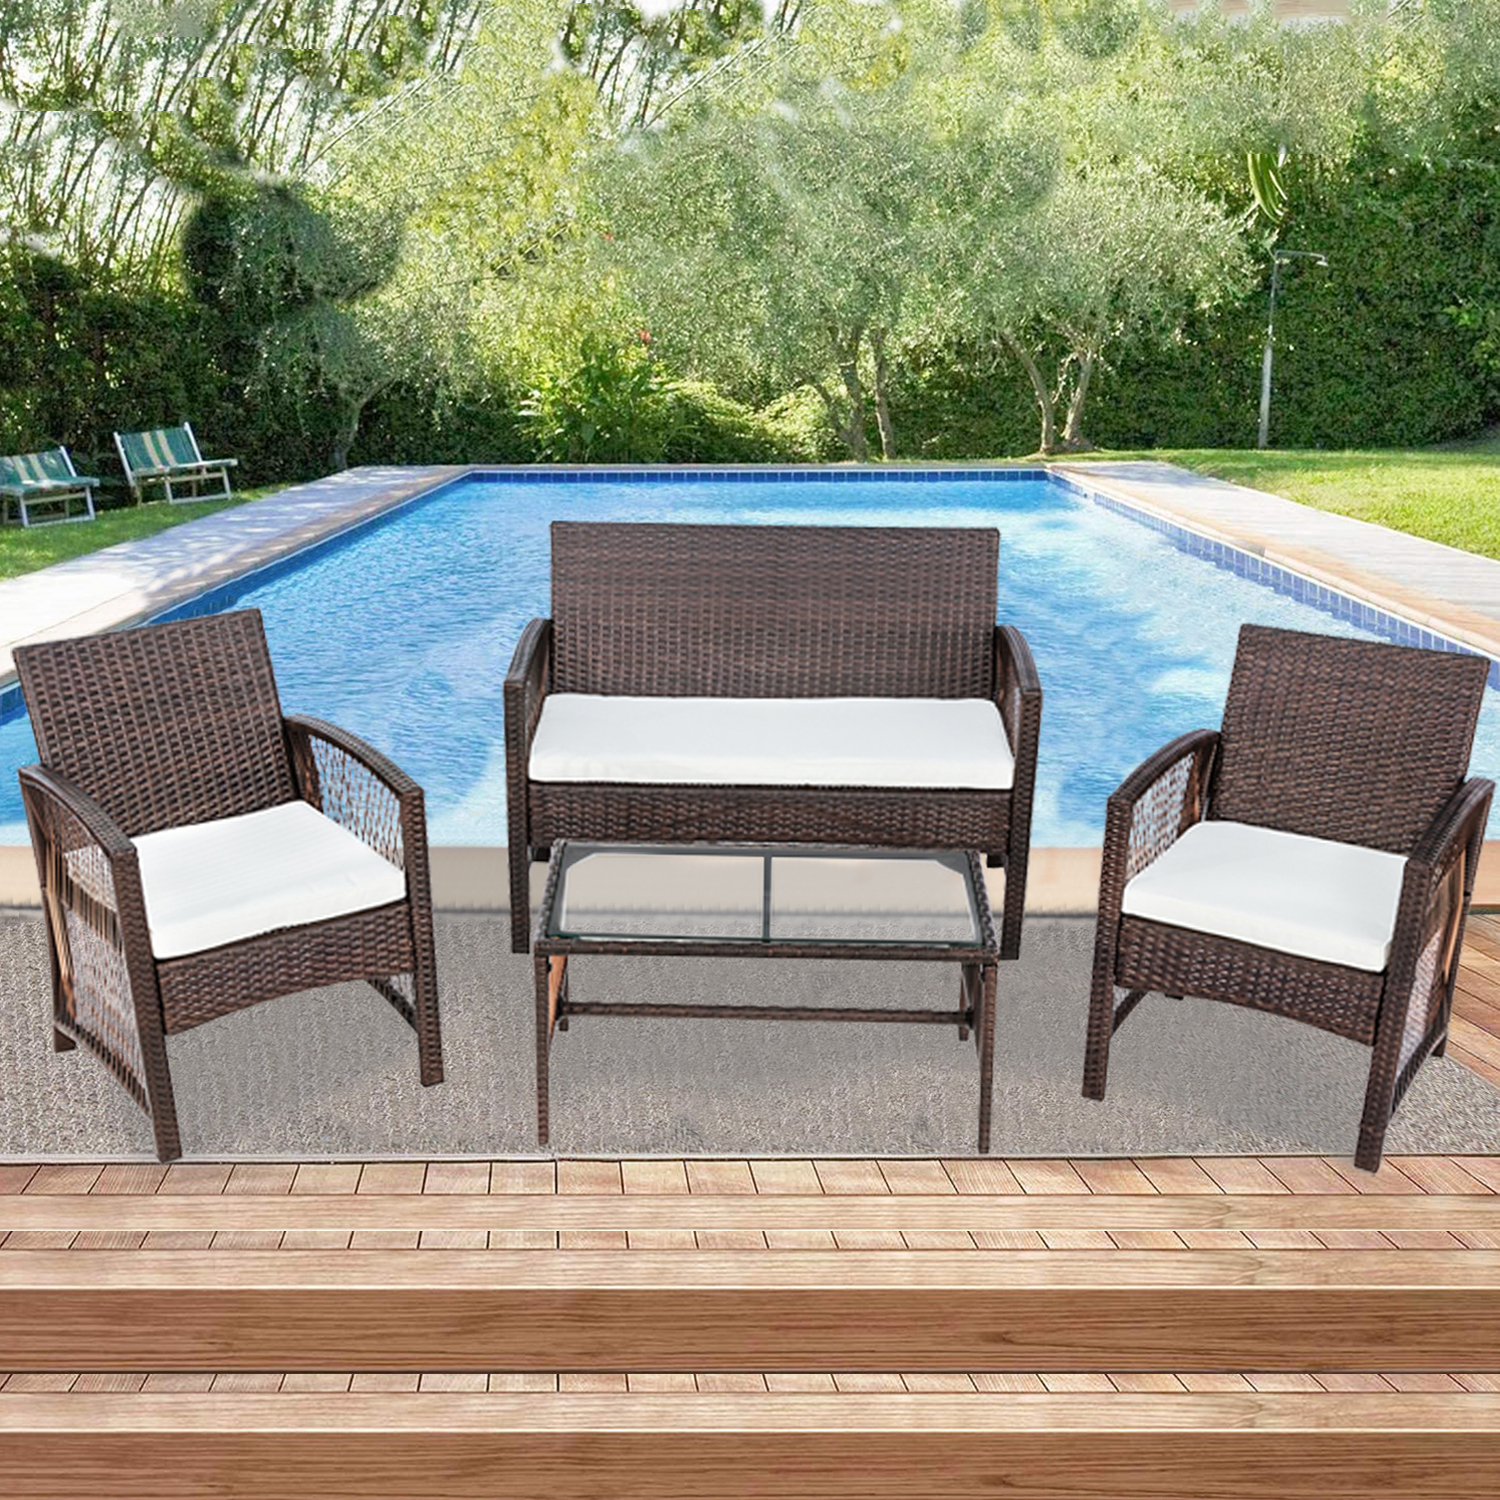 Patio Outdoor Furniture Sets, UHOMEPRO 4 Pieces PE Rattan Garden Furniture Wicker Chairs Set with Coffee Table, Outdoor Conversation Sets, Patio Dining Set for Backyard Poolside Porch, Brown, W7763 - image 1 of 11